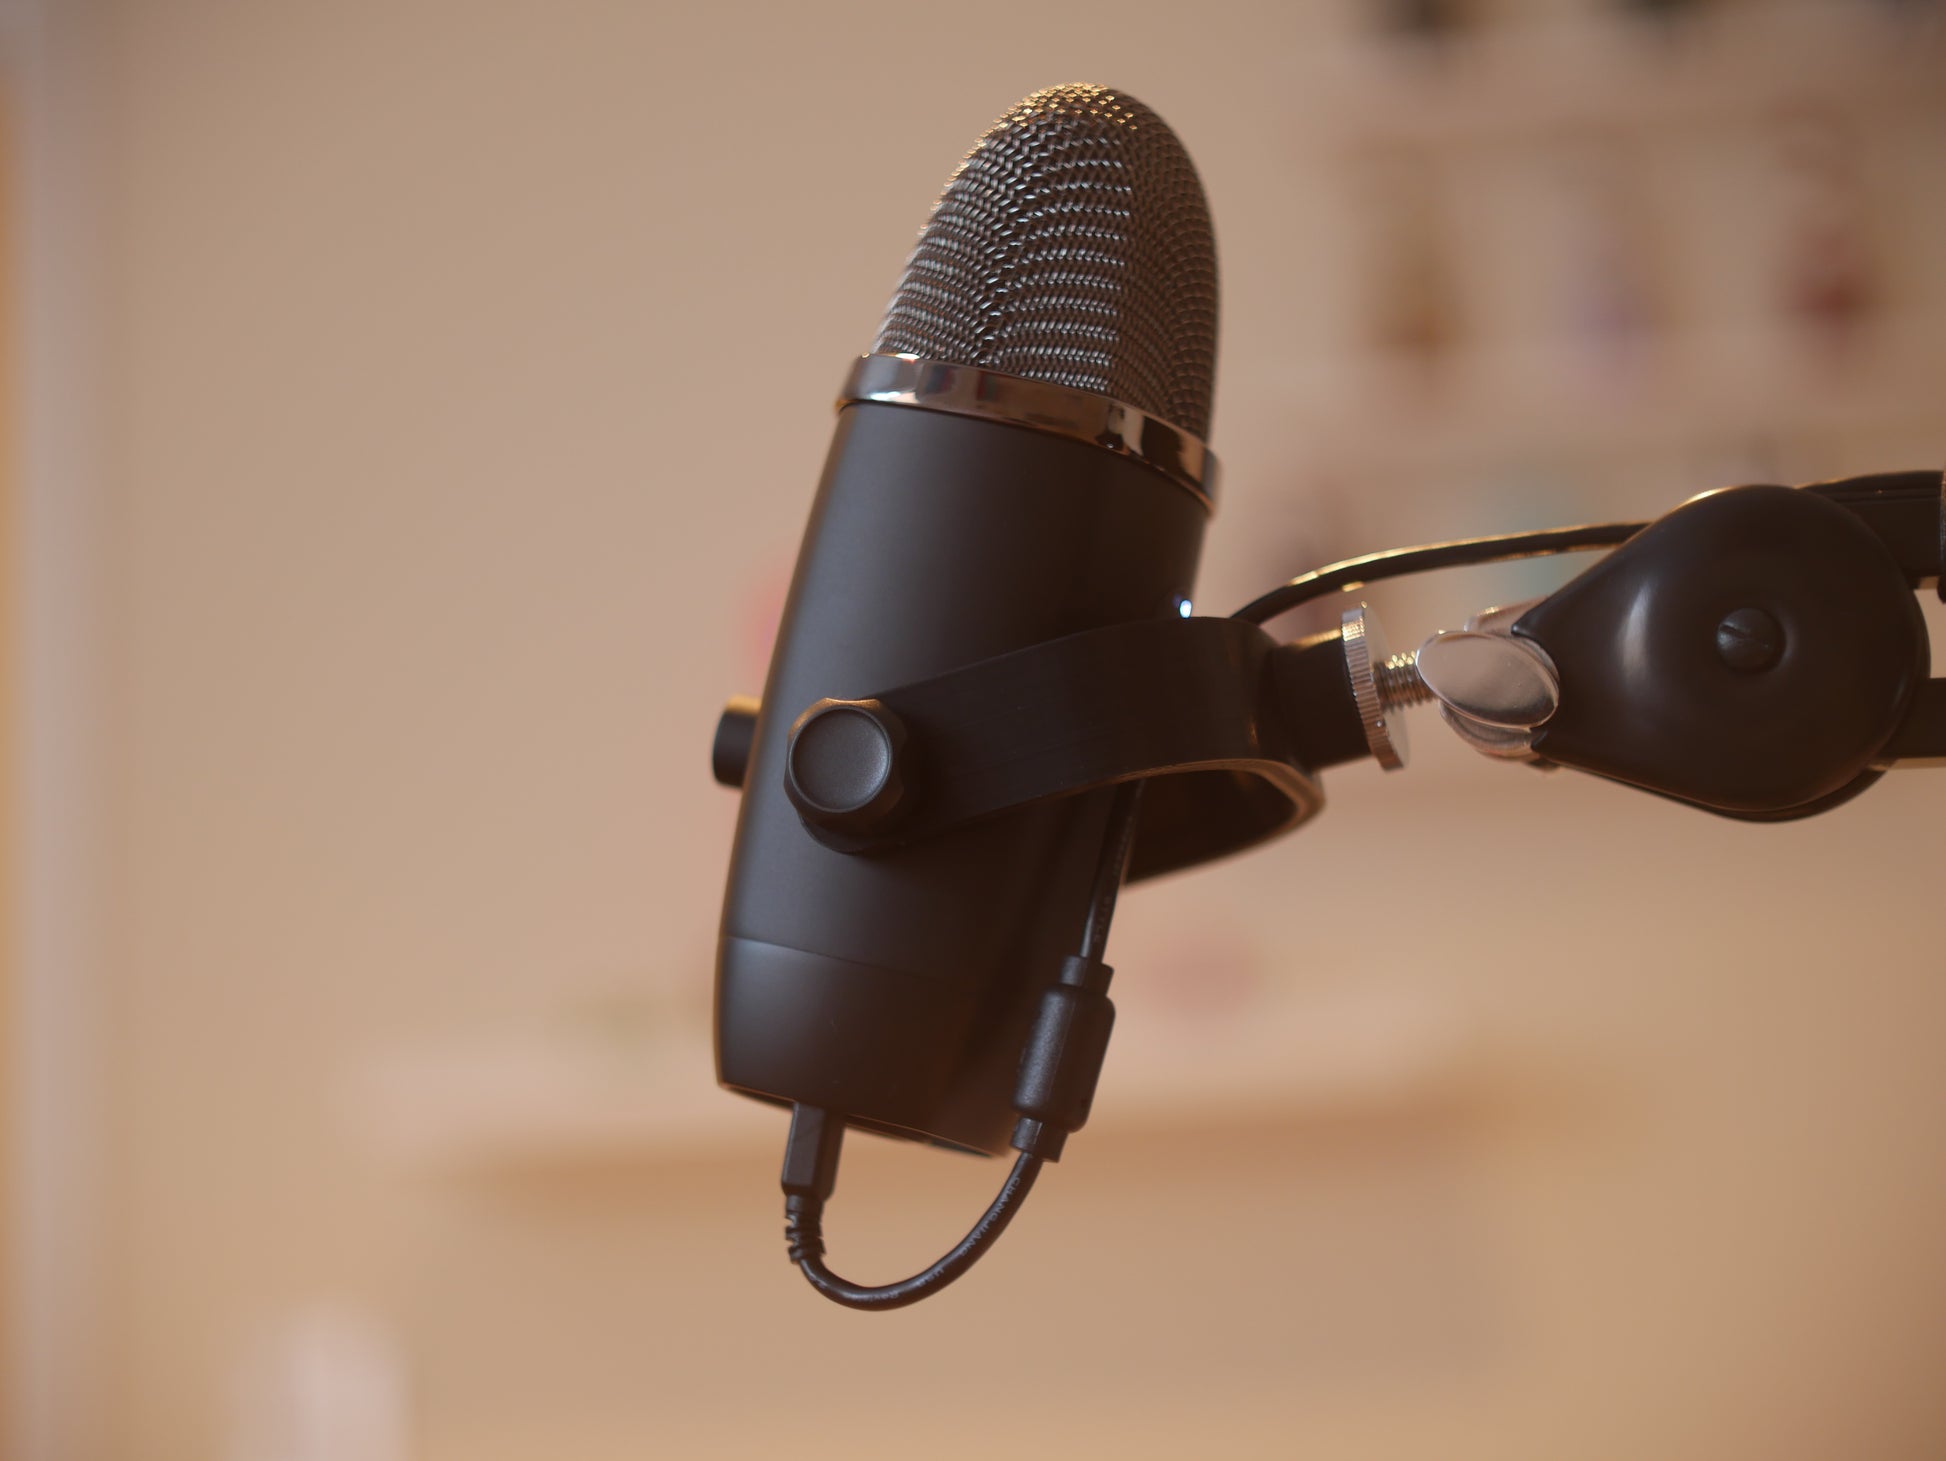 A black microphone mount attached to a boom arm holding a Blue Yeti X microphone.